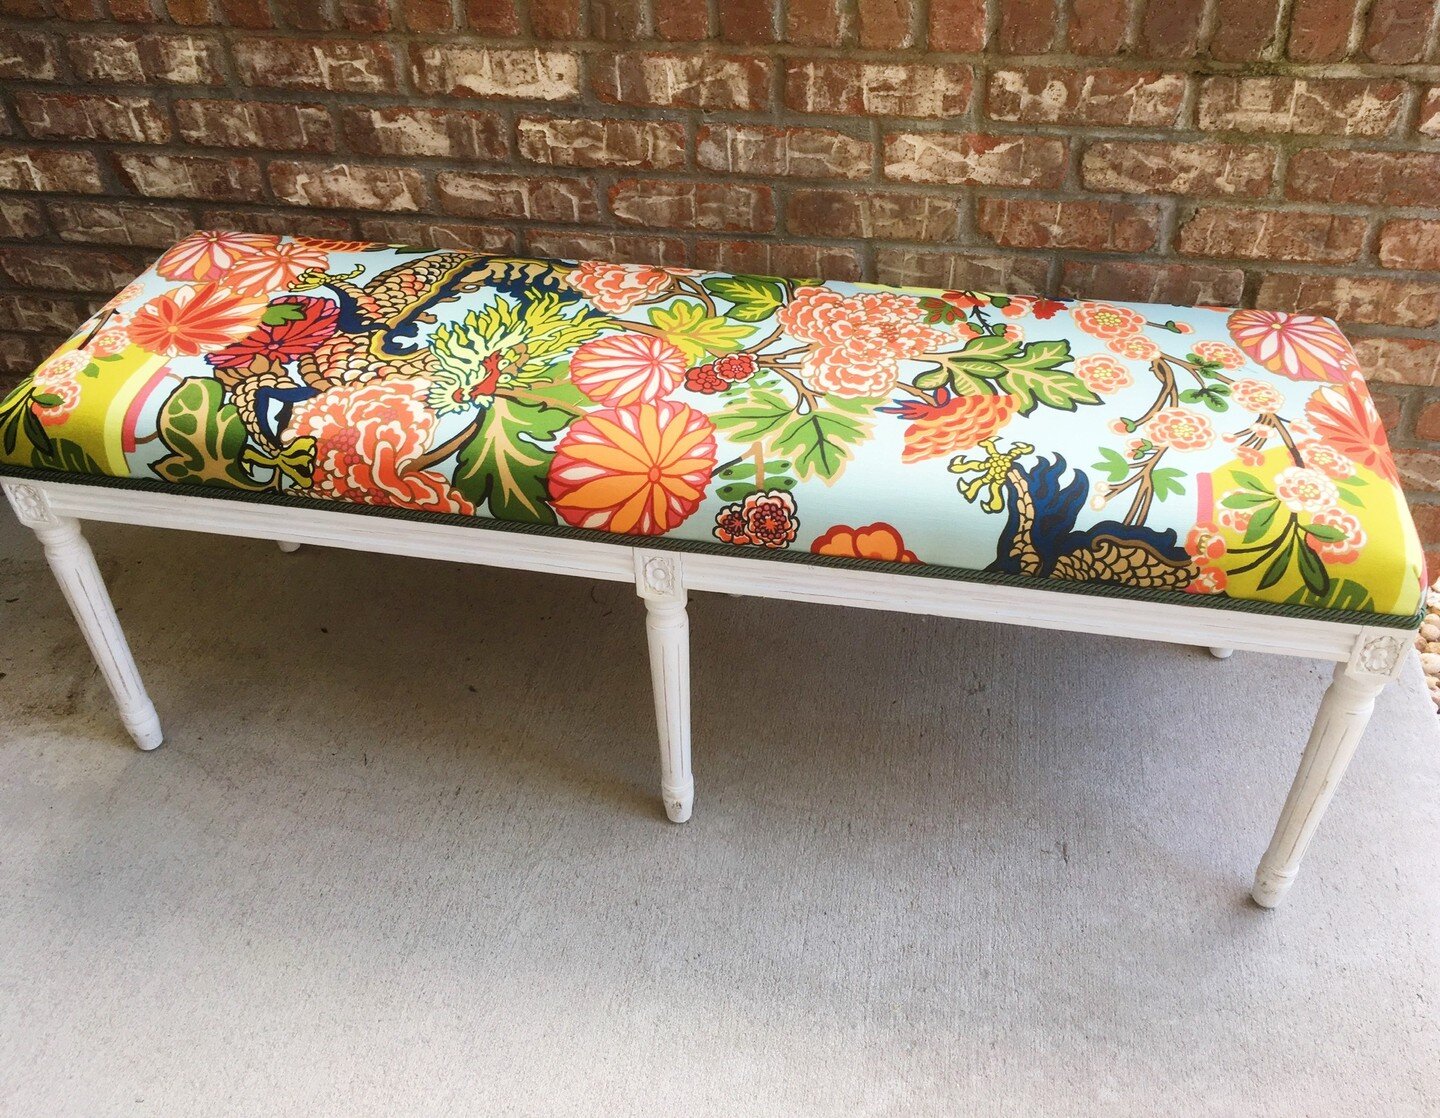 Dragons in the workroom! This upholstered bench is about as colorful and whimsical as you can get, My client LOVES bright and bold fabrics! I loved transforming this bench into a custom dream piece for a client&rsquo;s breakfast table. And the dragon